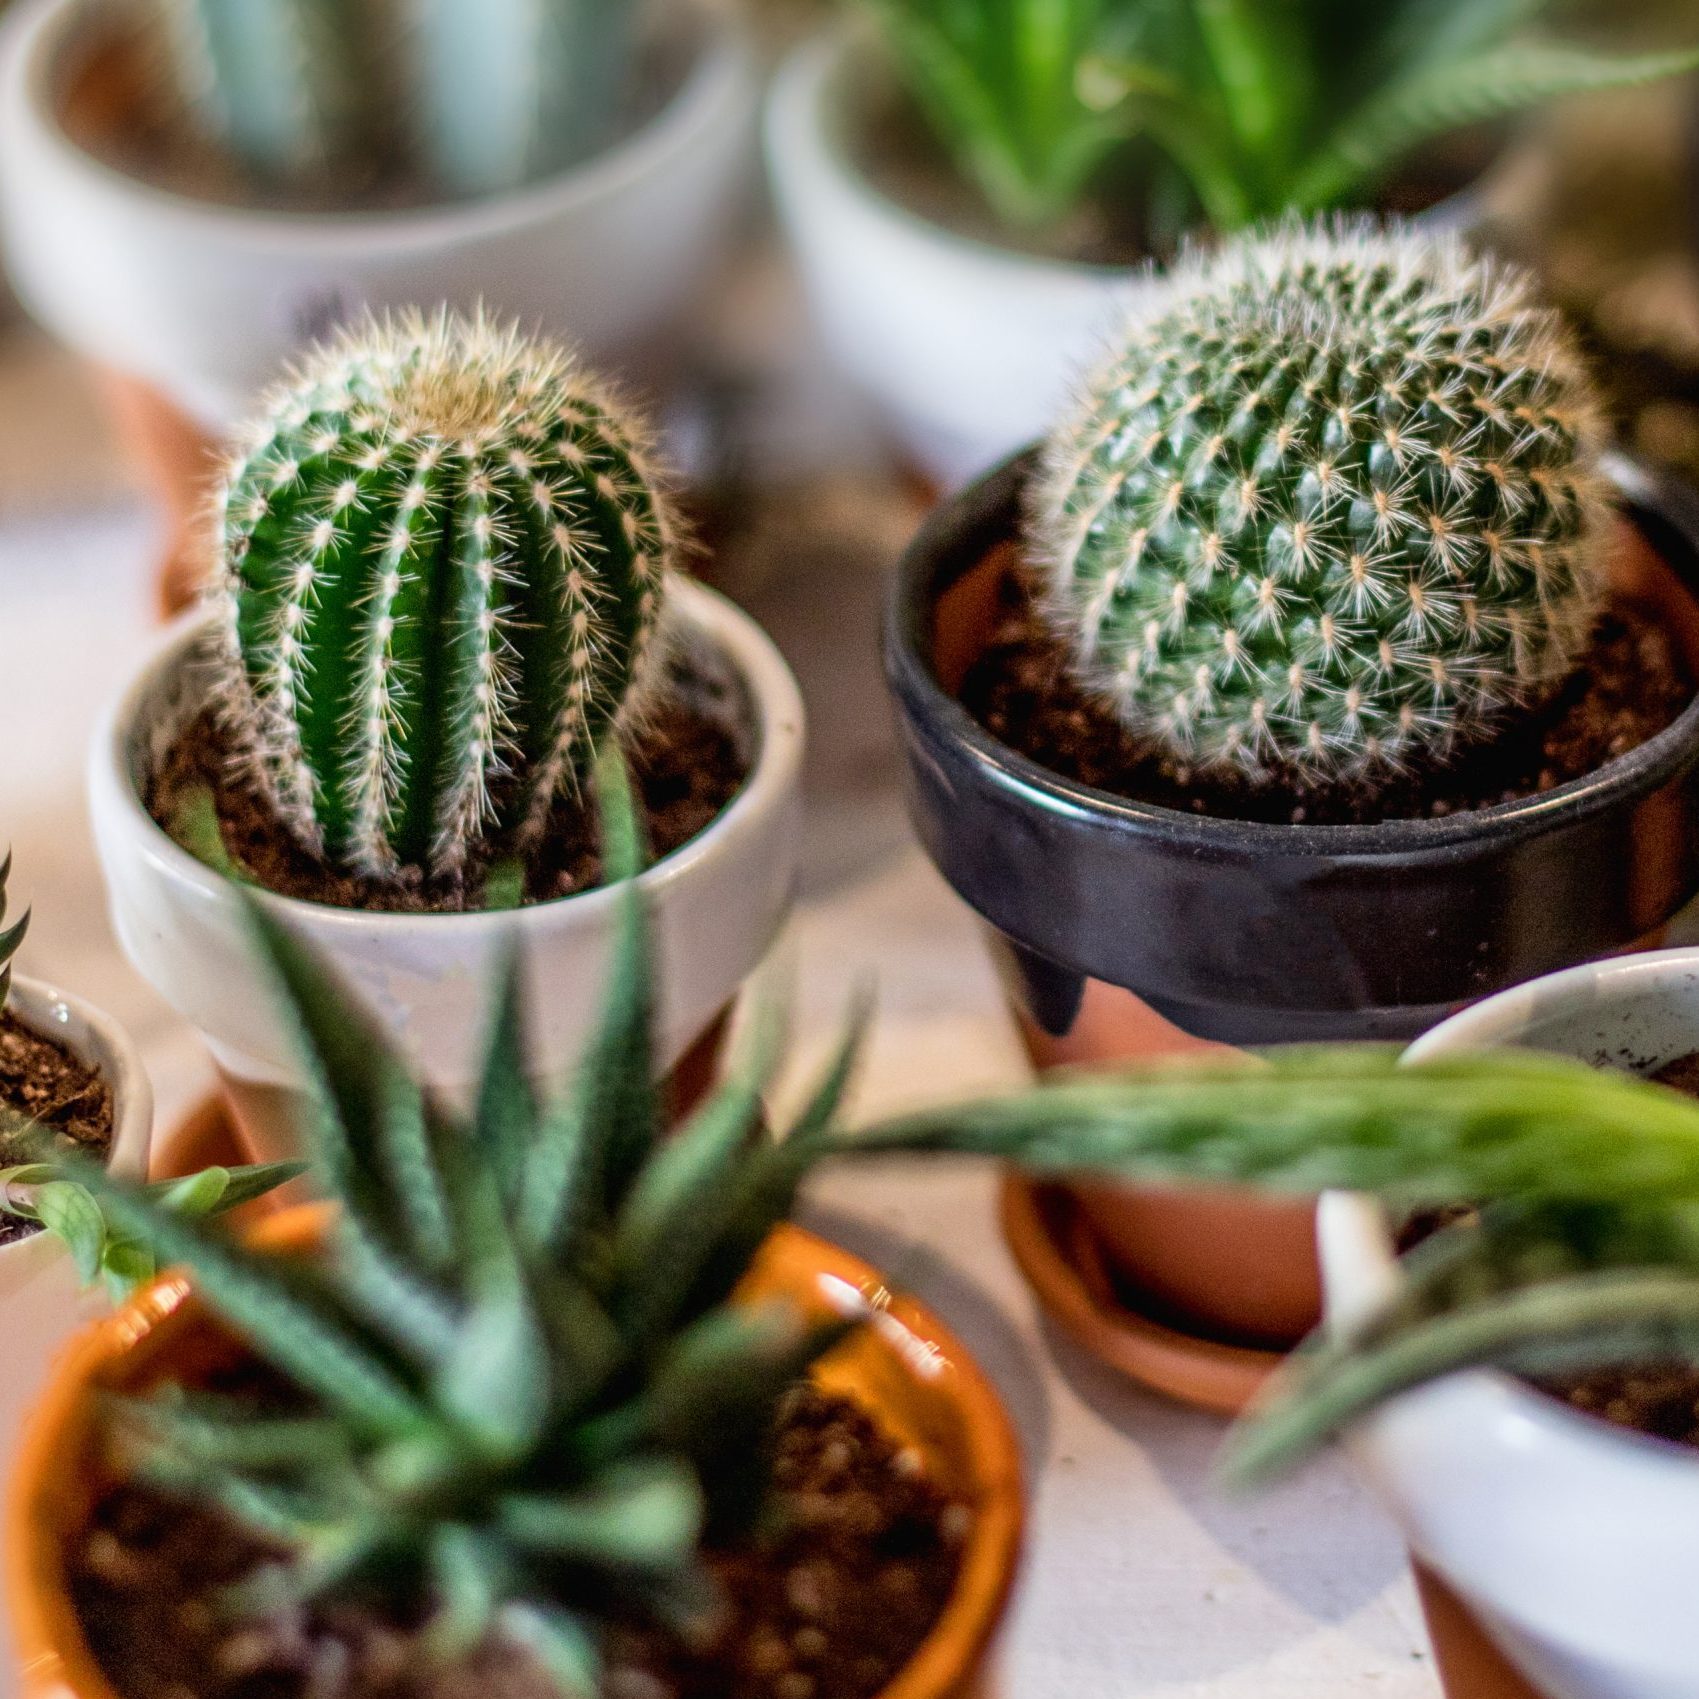 Insect pests of cacti and succulents grown as house plants